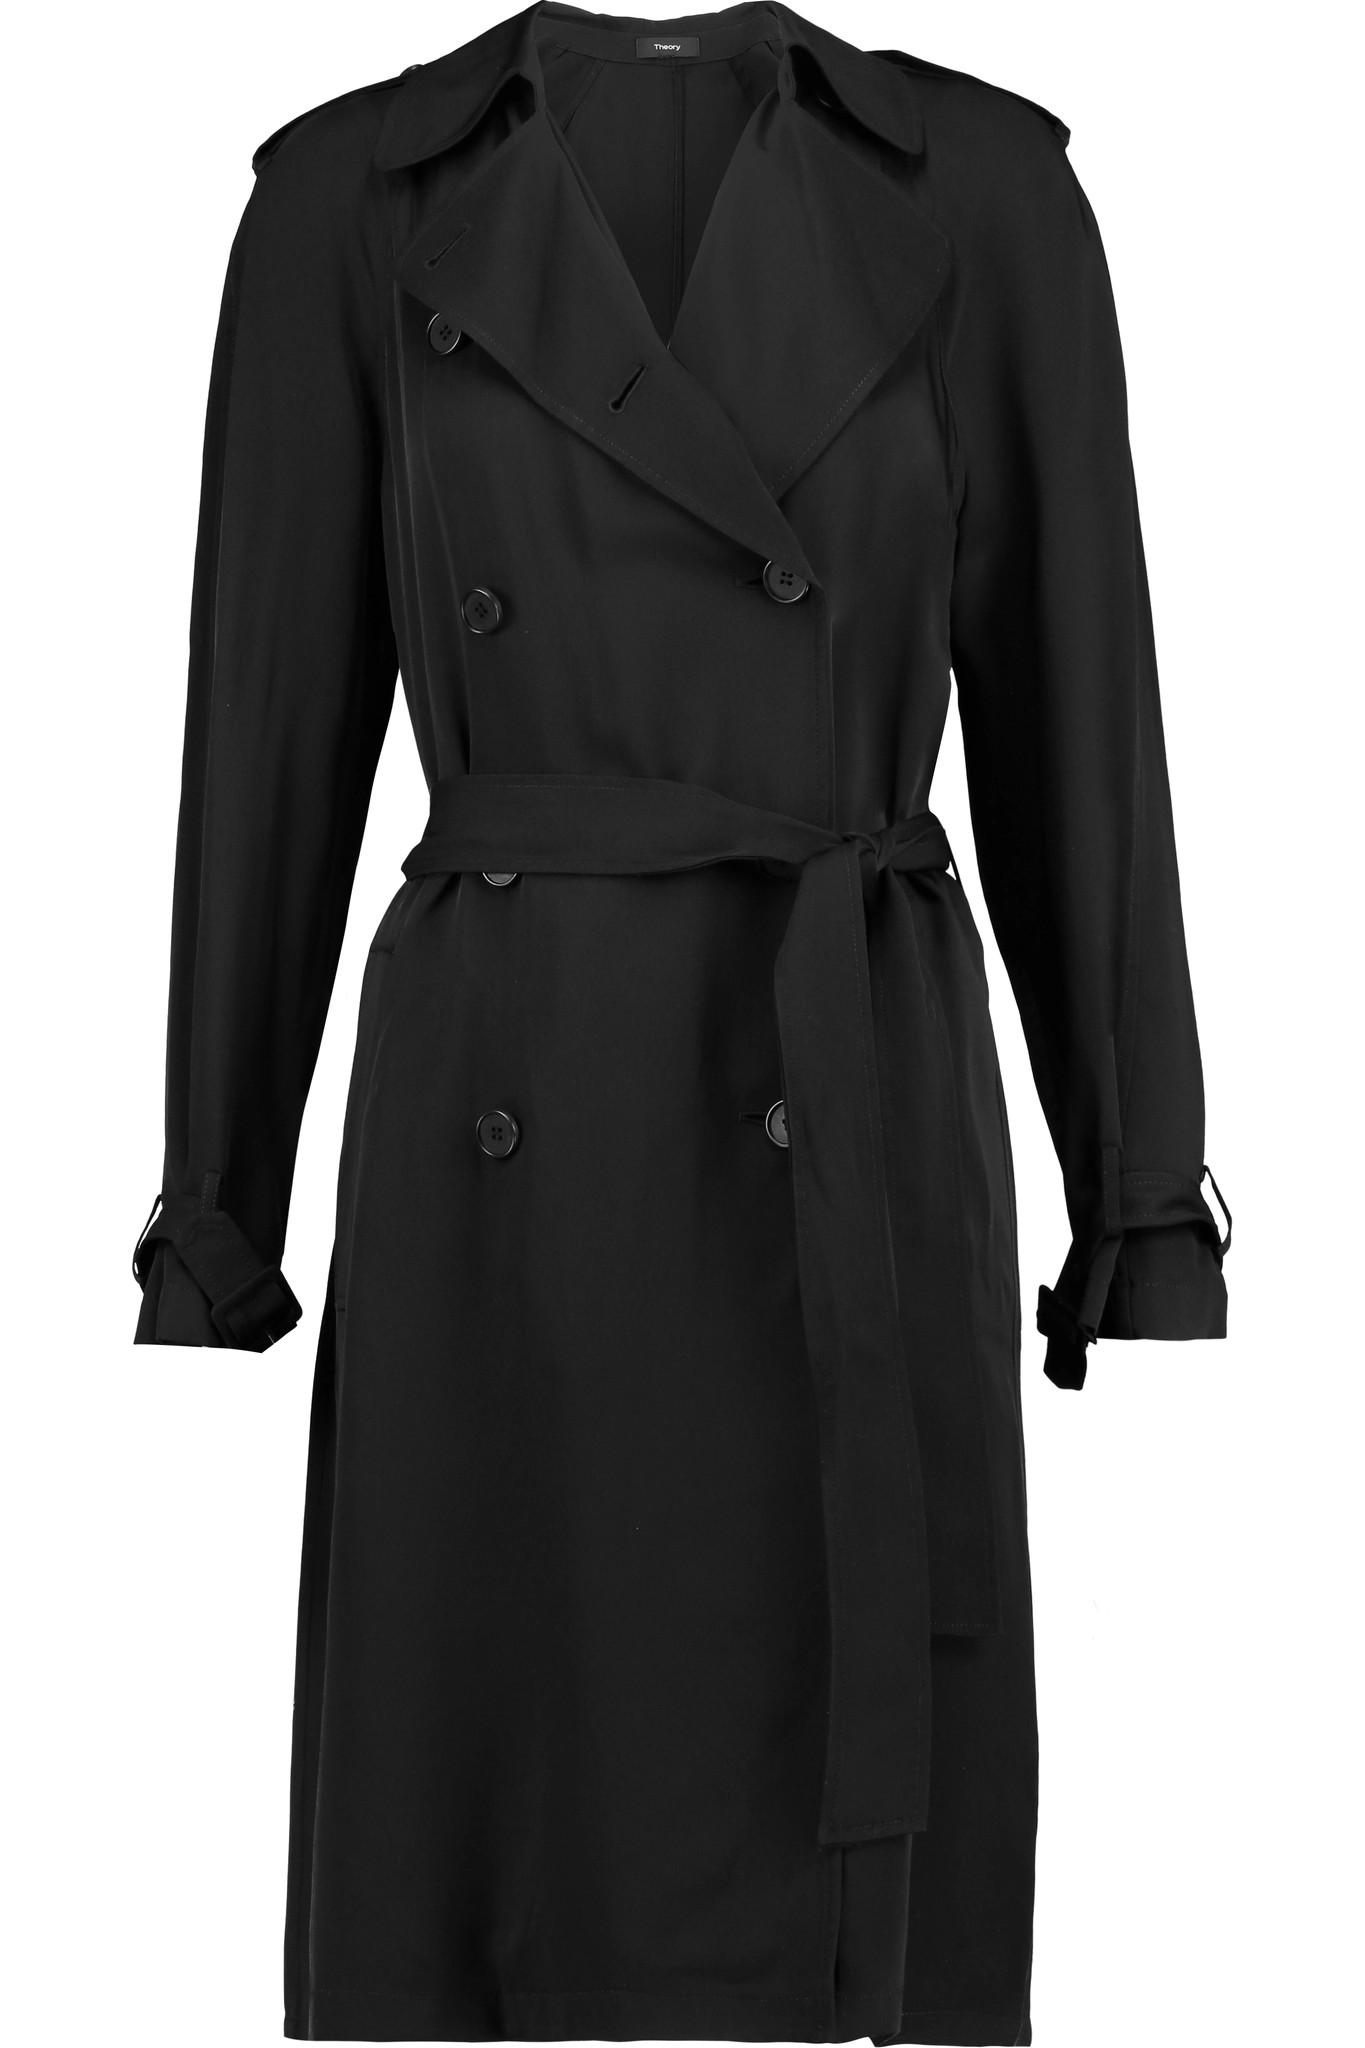 Theory Laurelwood Silk Crepe De Chine Trench Coat in Black - Lyst